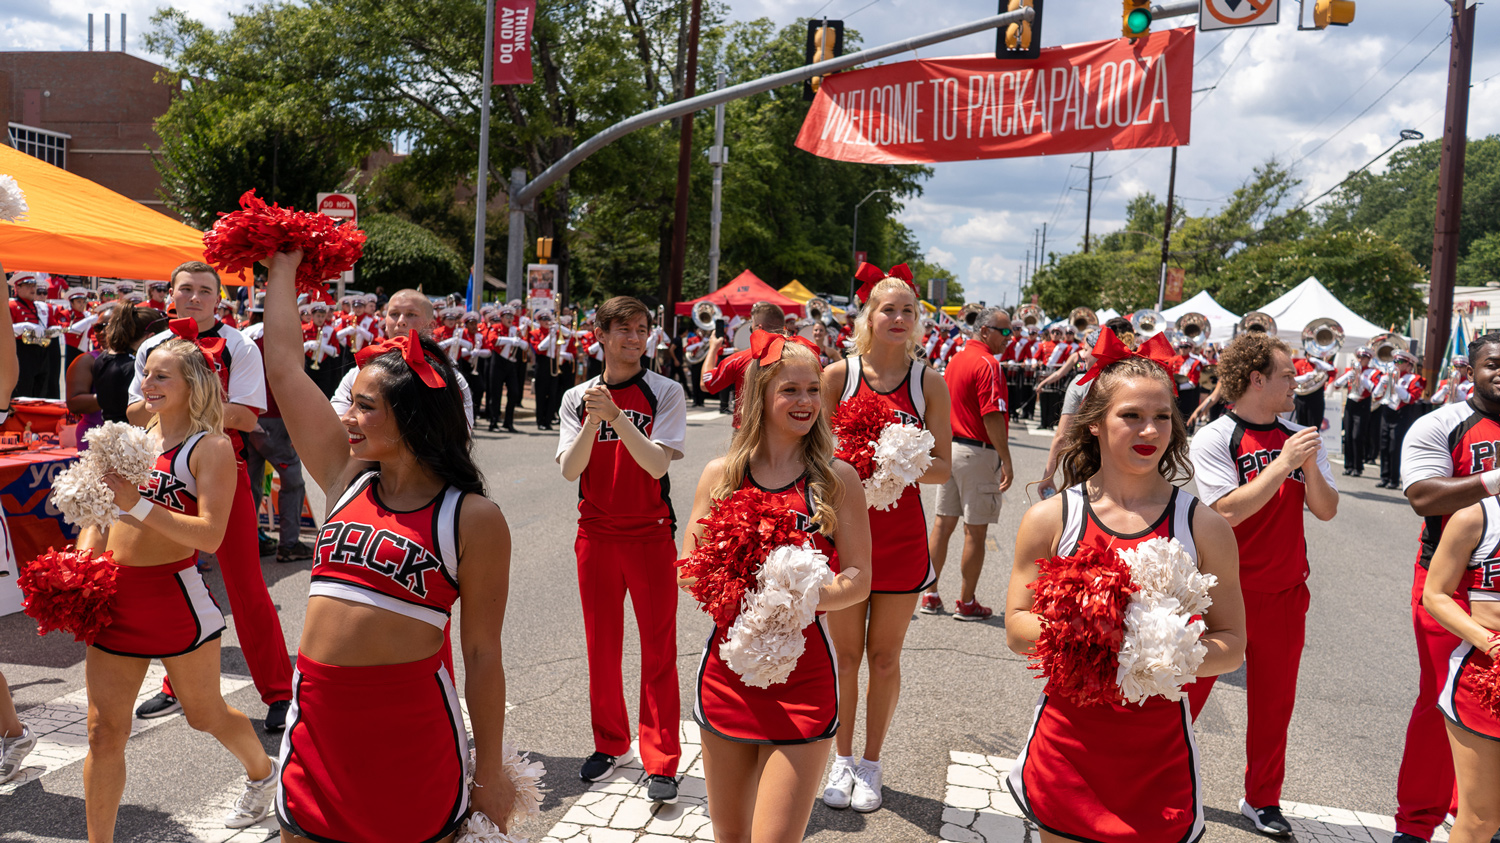 Cheerleaders with the marching band in the background under the Packapalooza street banner on Hillsborough Street.